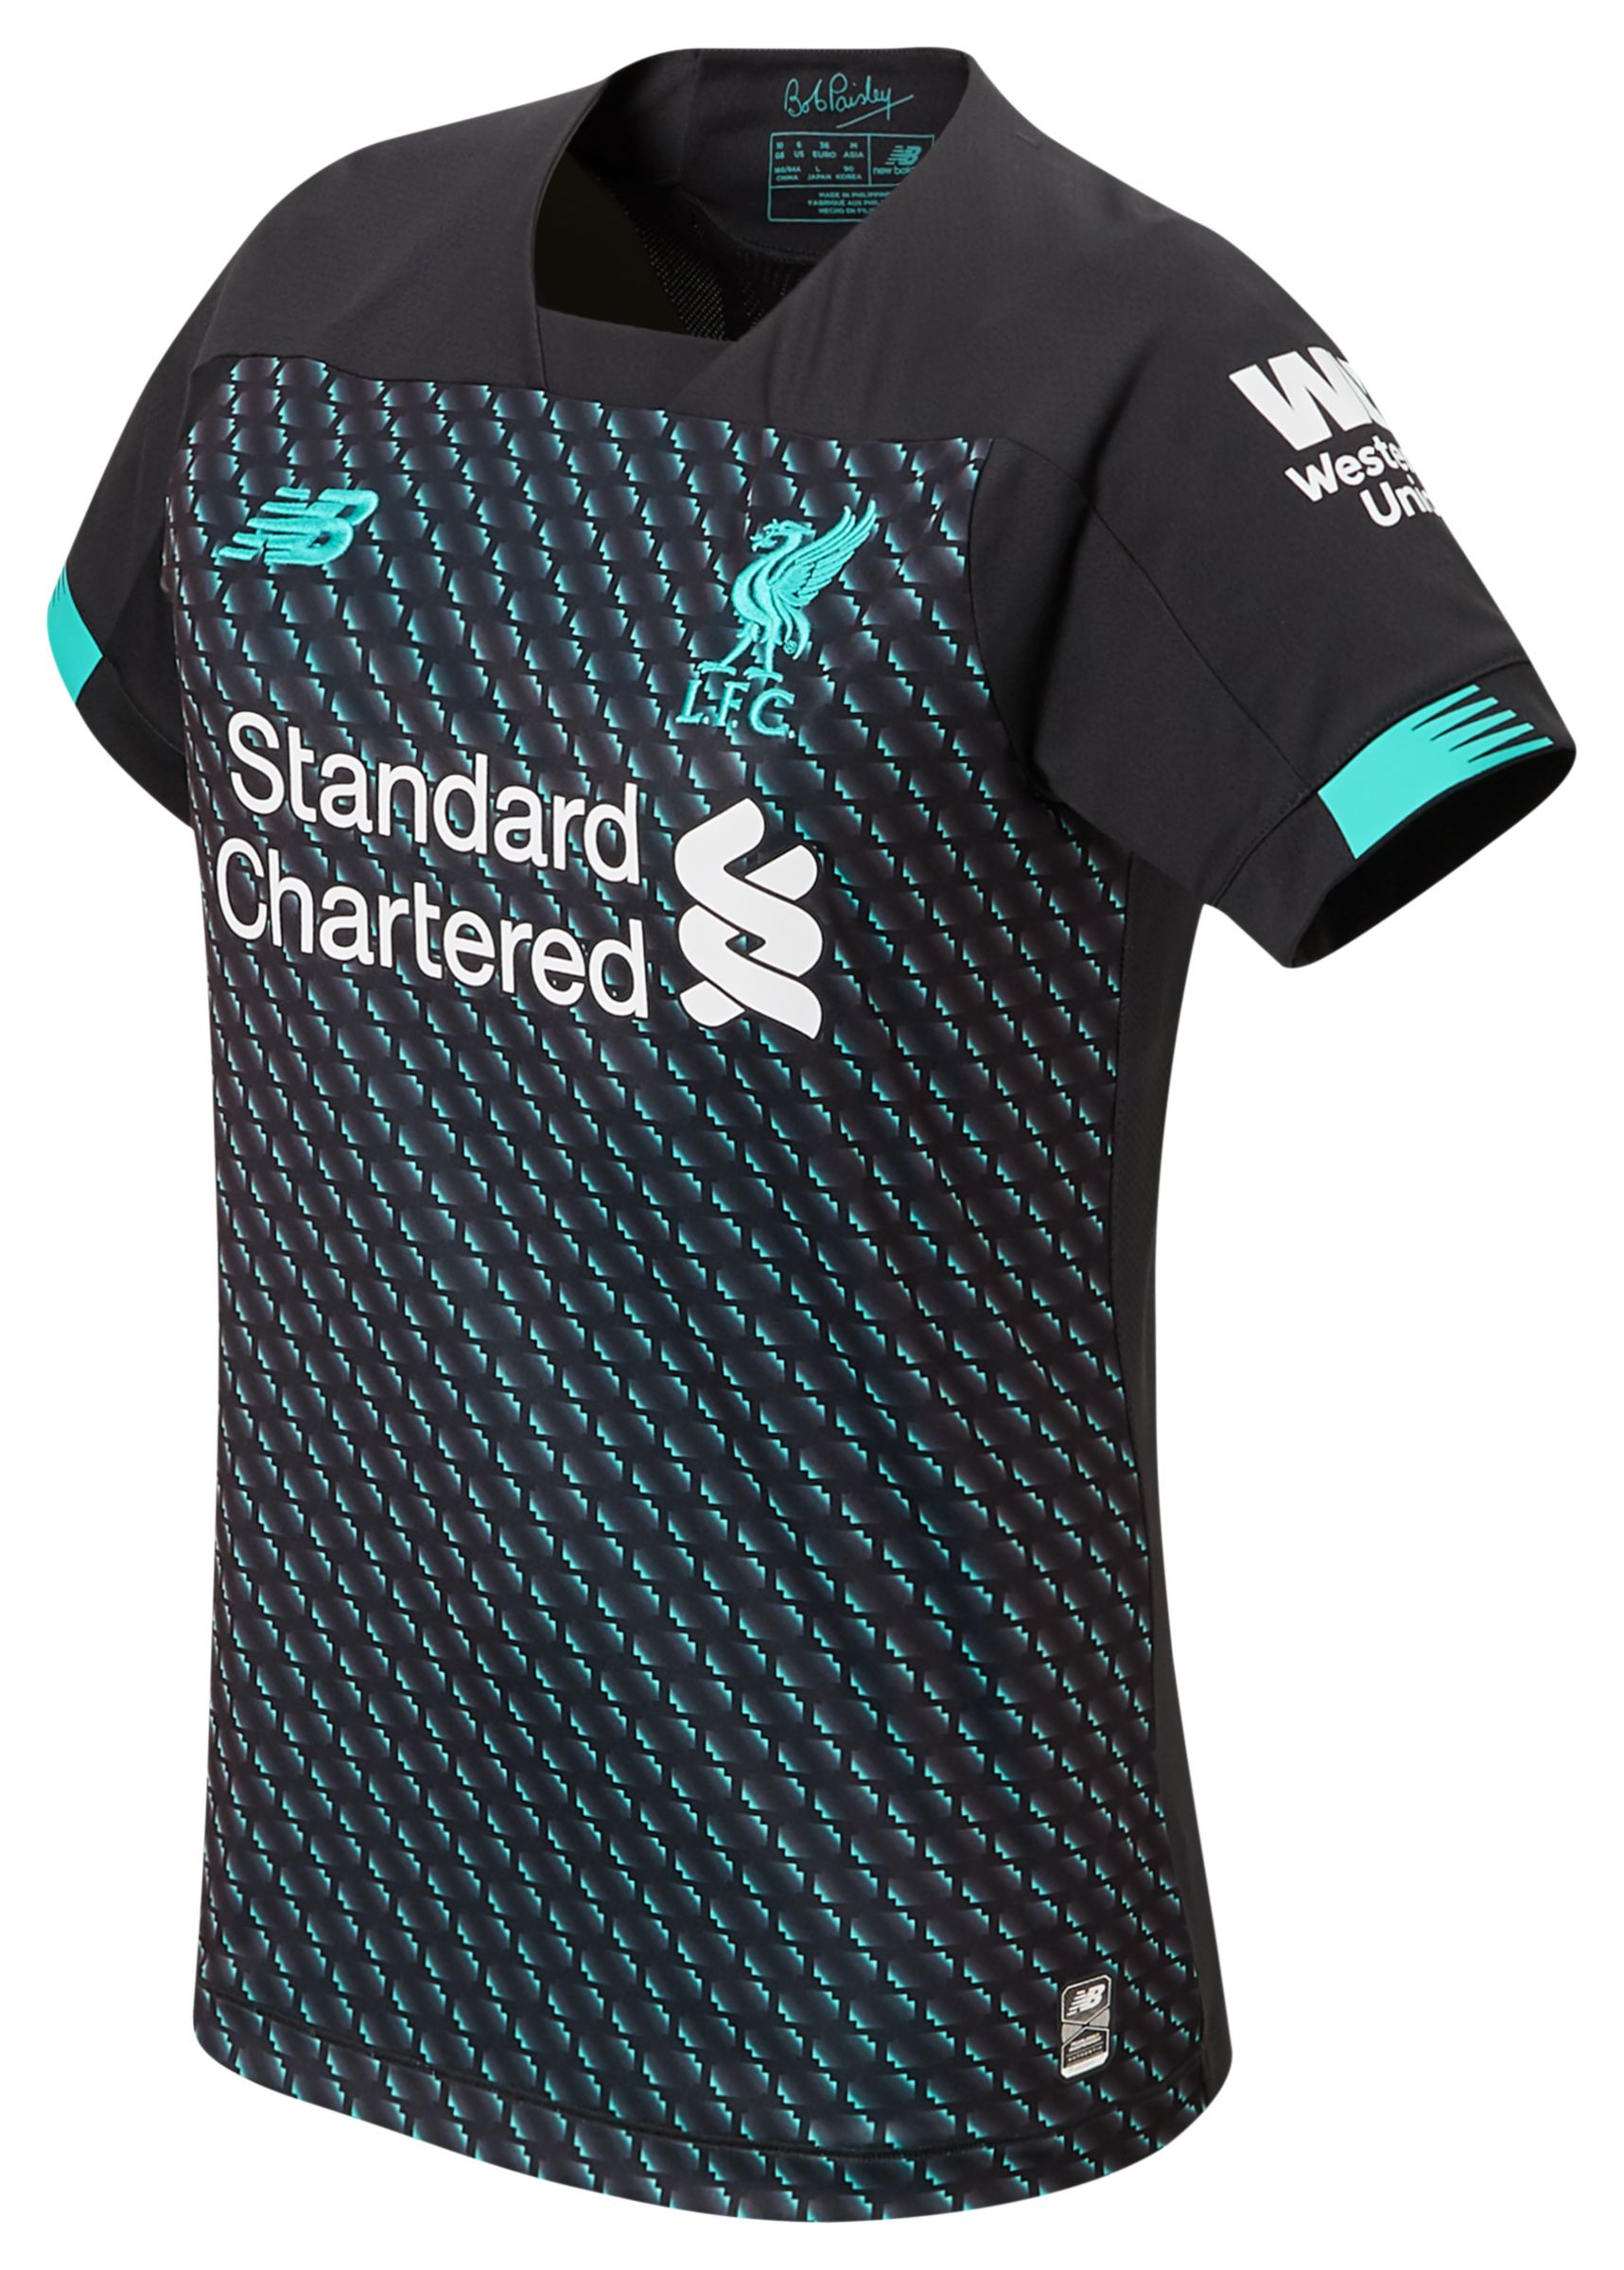 liverpool jersey total sports